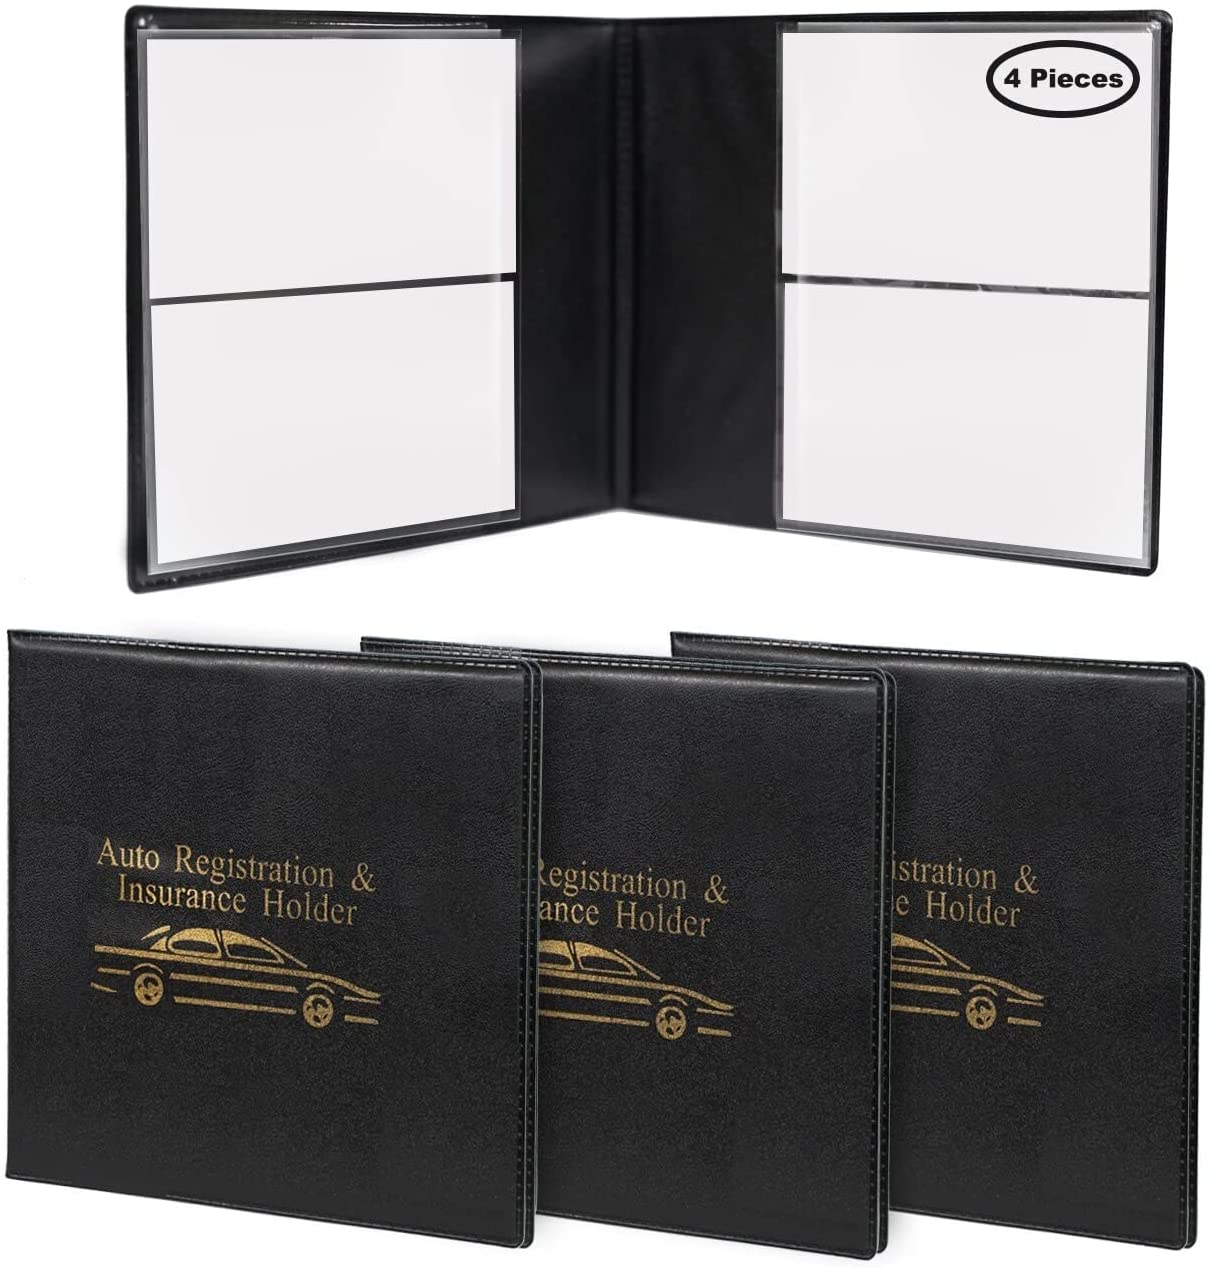 ESSENTIAL Car Auto Insurance Registration BLACK Document Wallet Holders 2 Pack - [BUNDLE, 2Pcs] - Automobile, Motorcycle, Truck, Trailer Vinyl ID Holder & Visor Storage - Strong Closure on Each - Necessary in Every Vehicle - 2 Pack Set